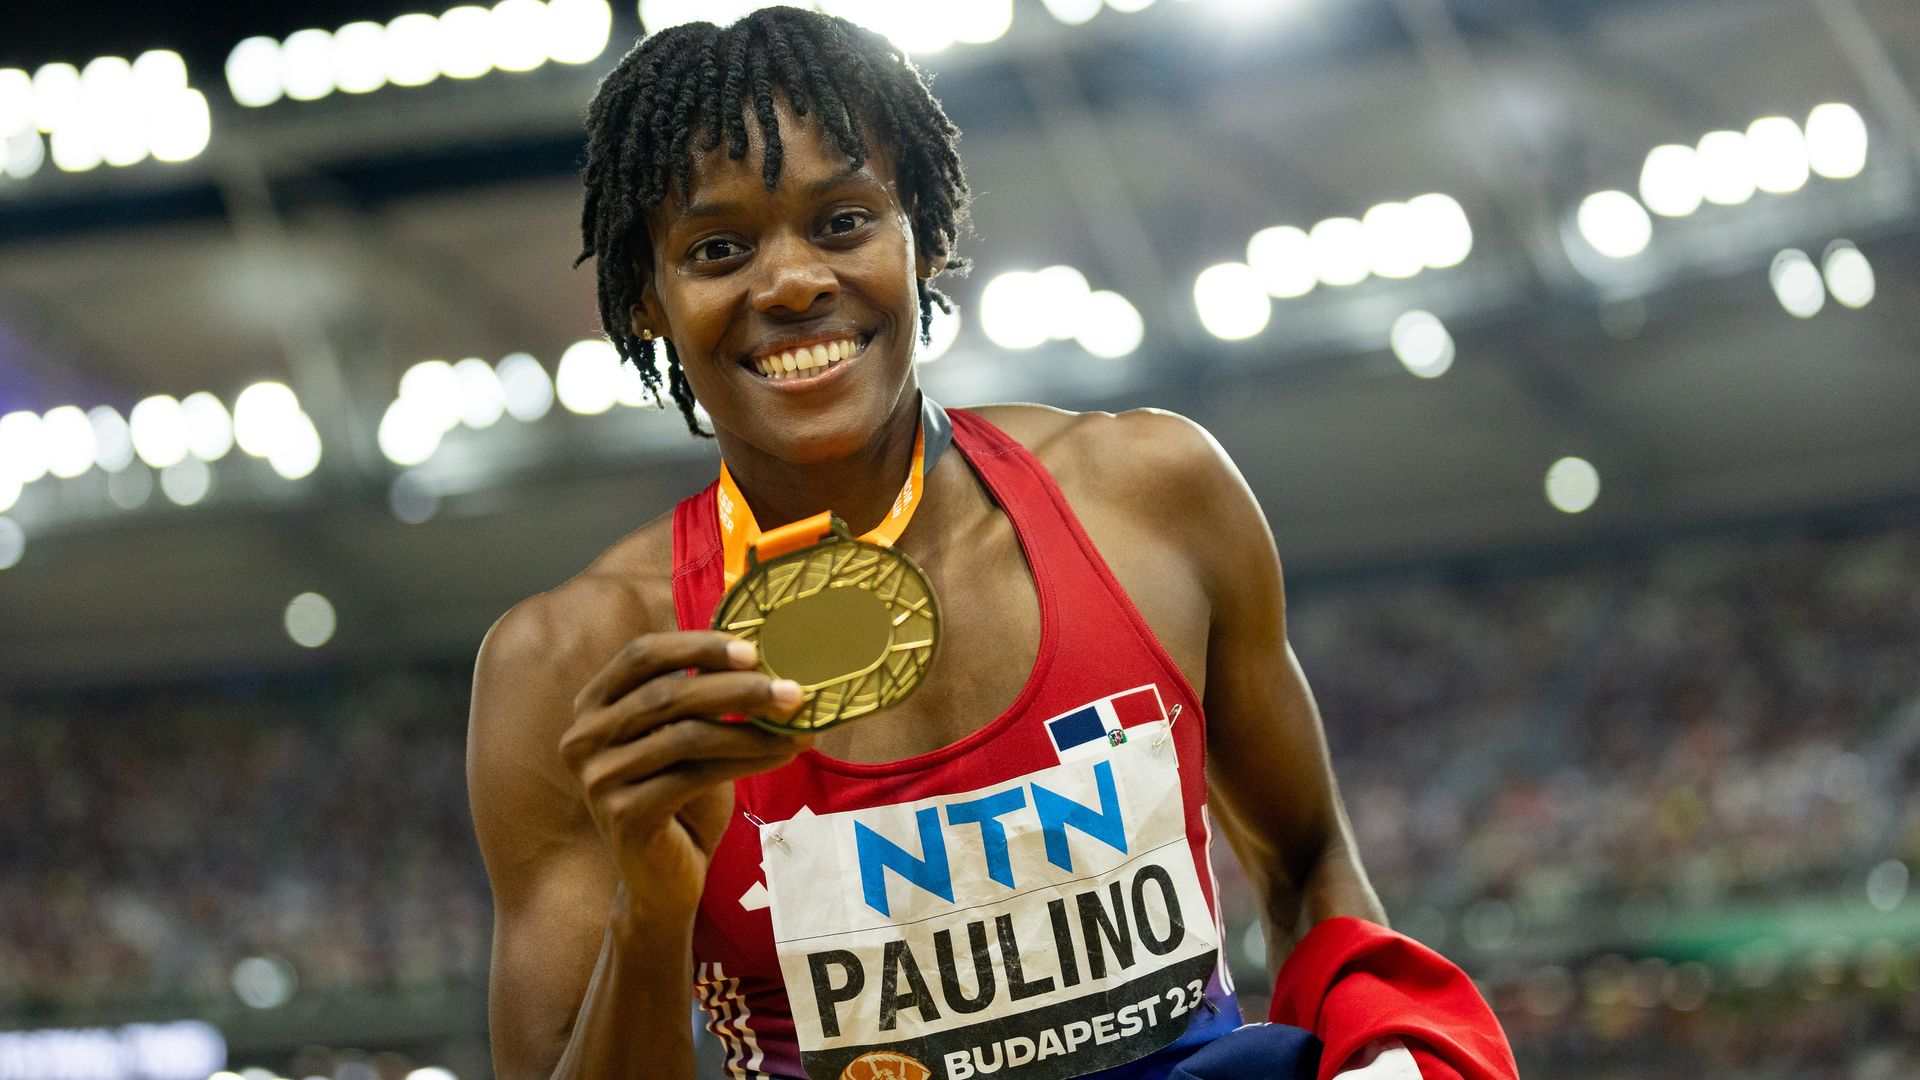 Latin American athletes to watch at the 2024 Paris Olympics